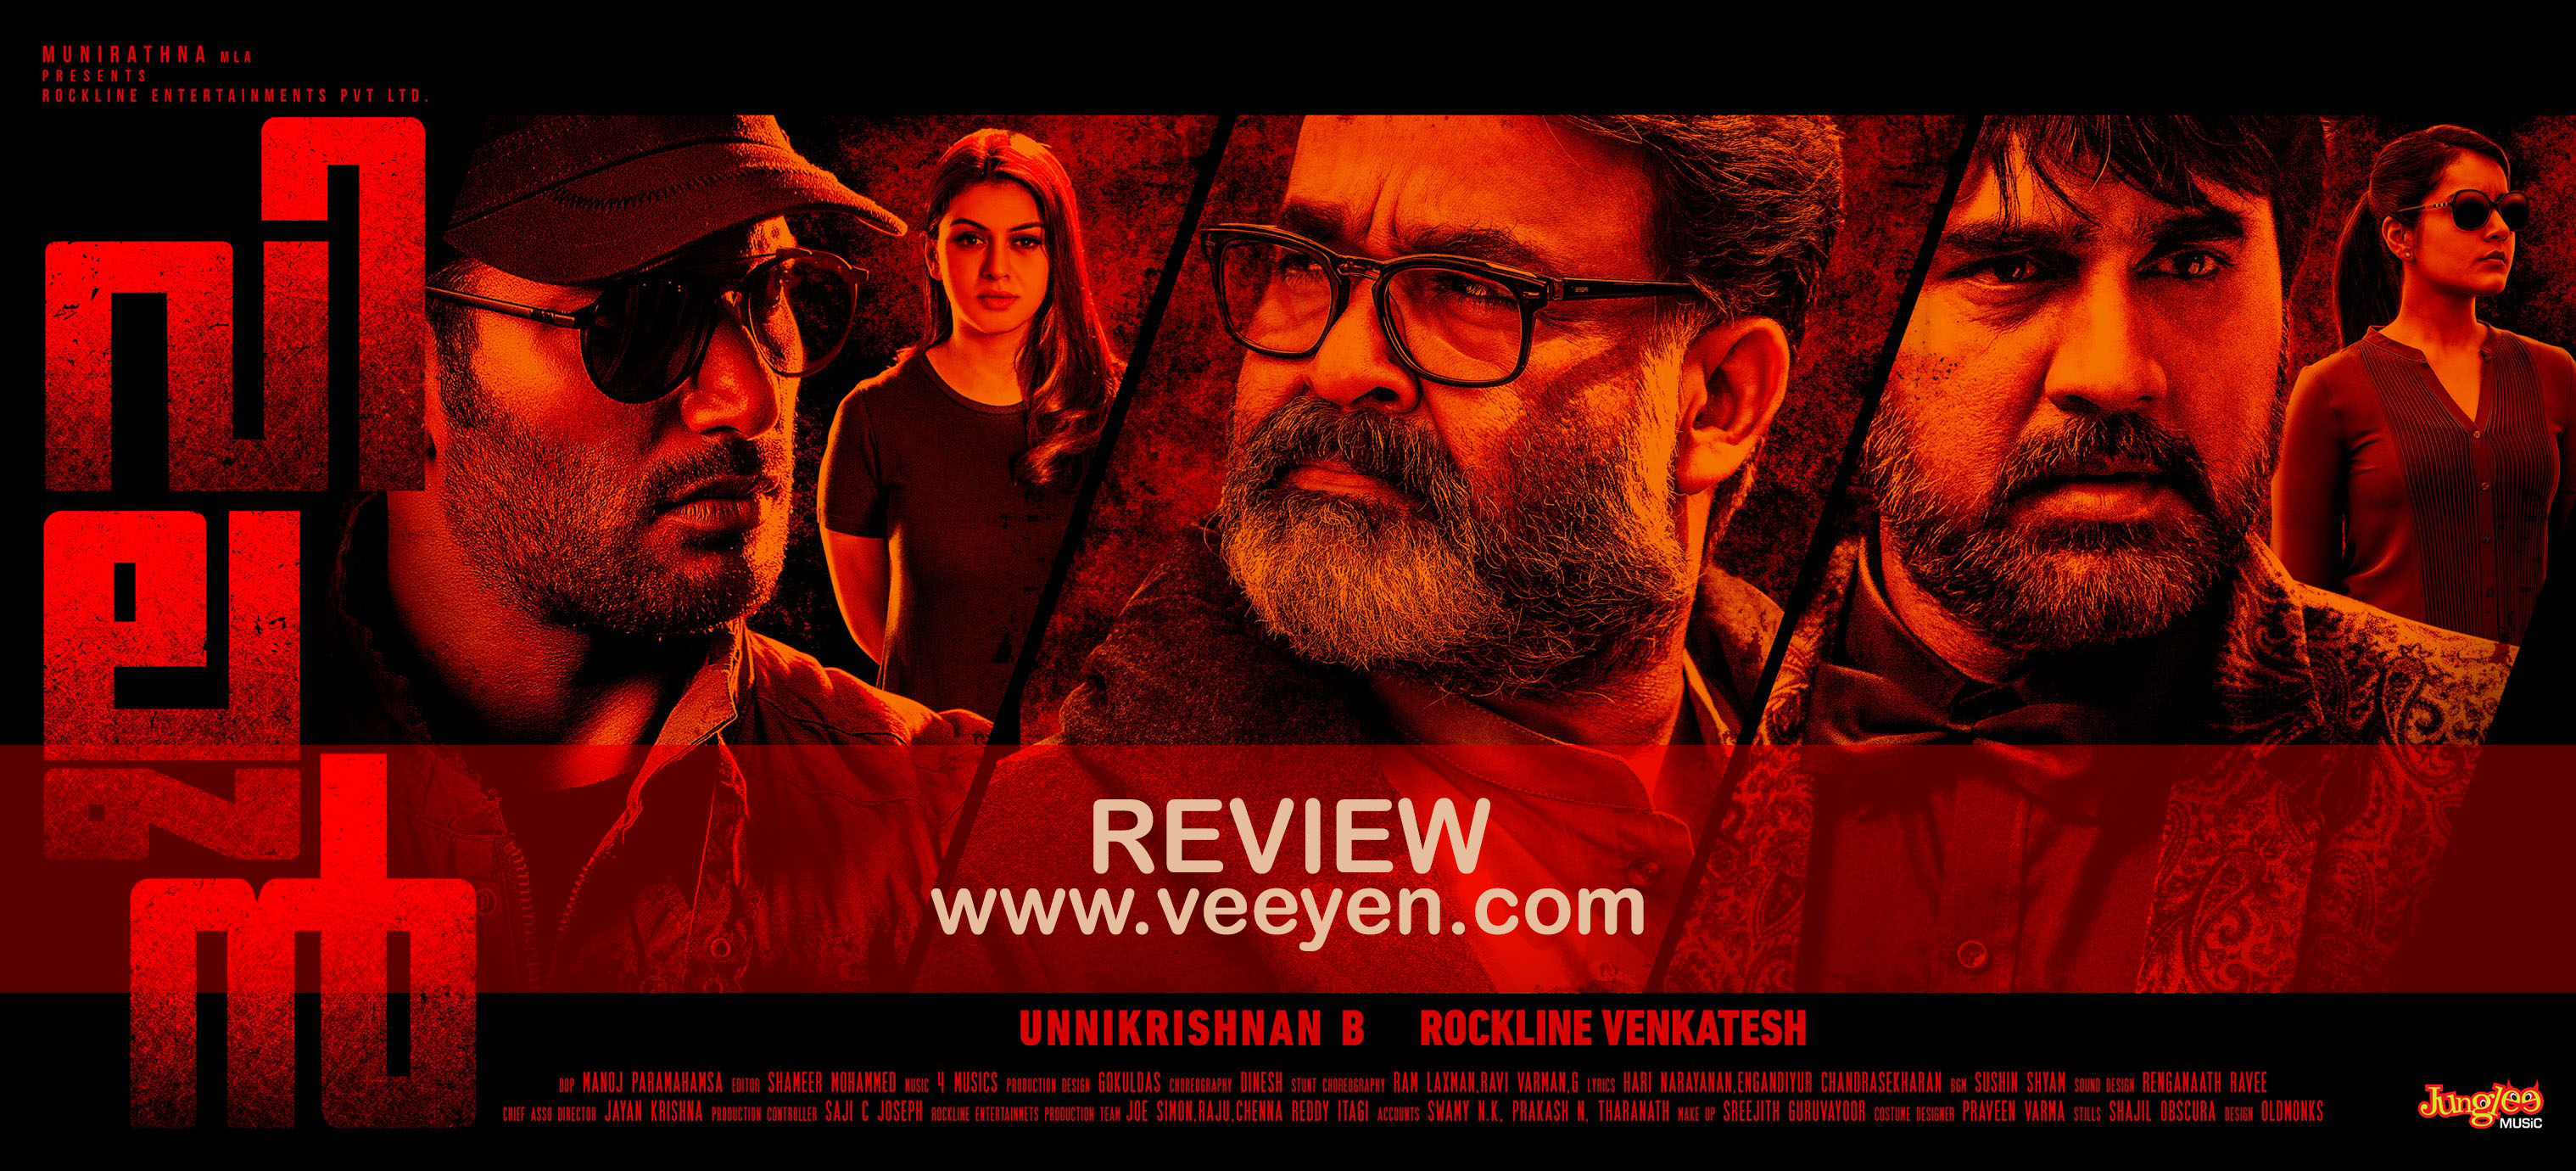 Villain 2017 Malayalam Movie Review Veeyen Veeyen Unplugged The romance between two students forms the first track, story of a villain forms the second track and third track. veeyen unplugged